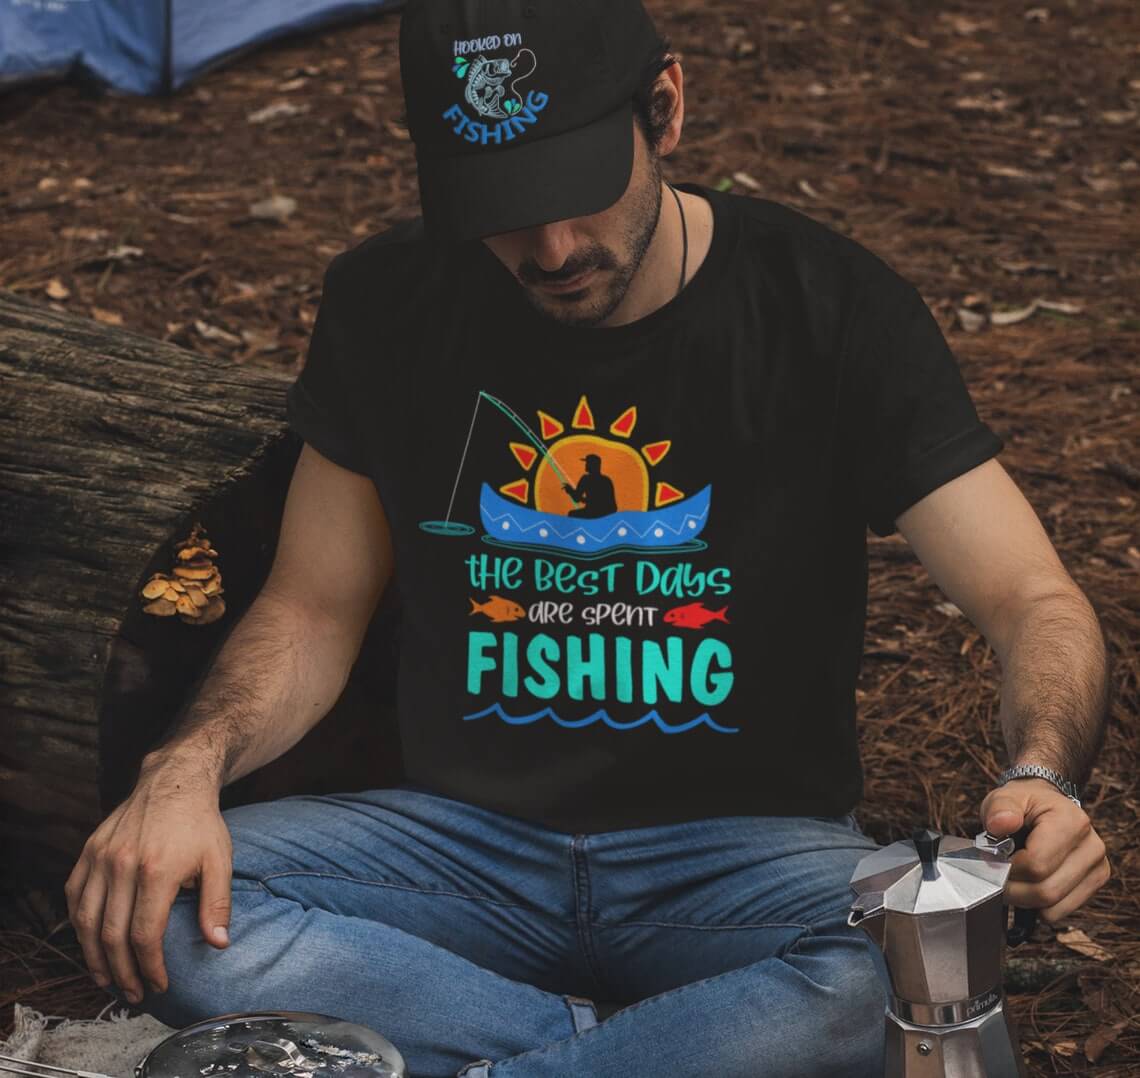 Show everyone that you are a fisherman.